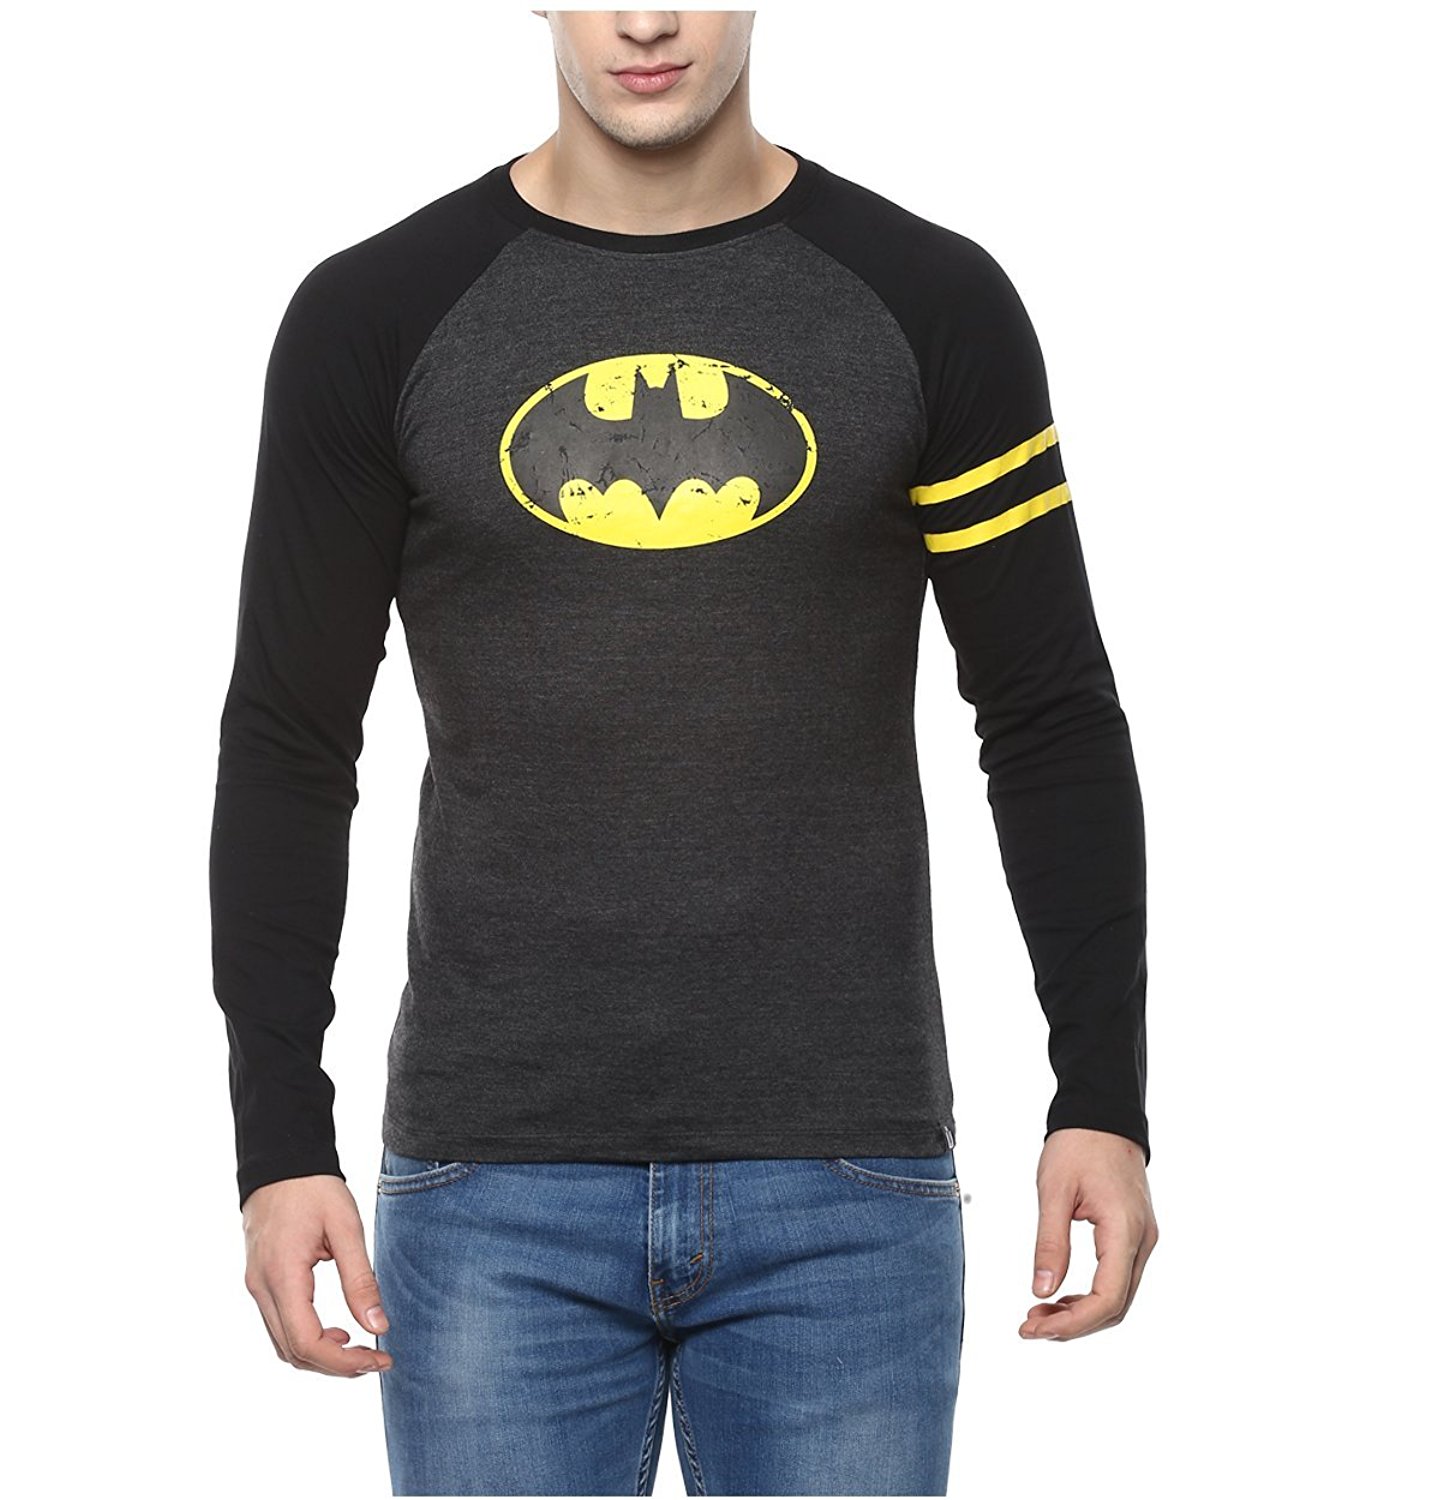 Urbano Fashion Men's T-Shirts & Jeans Upto 60% Discount Starts From Rs.349